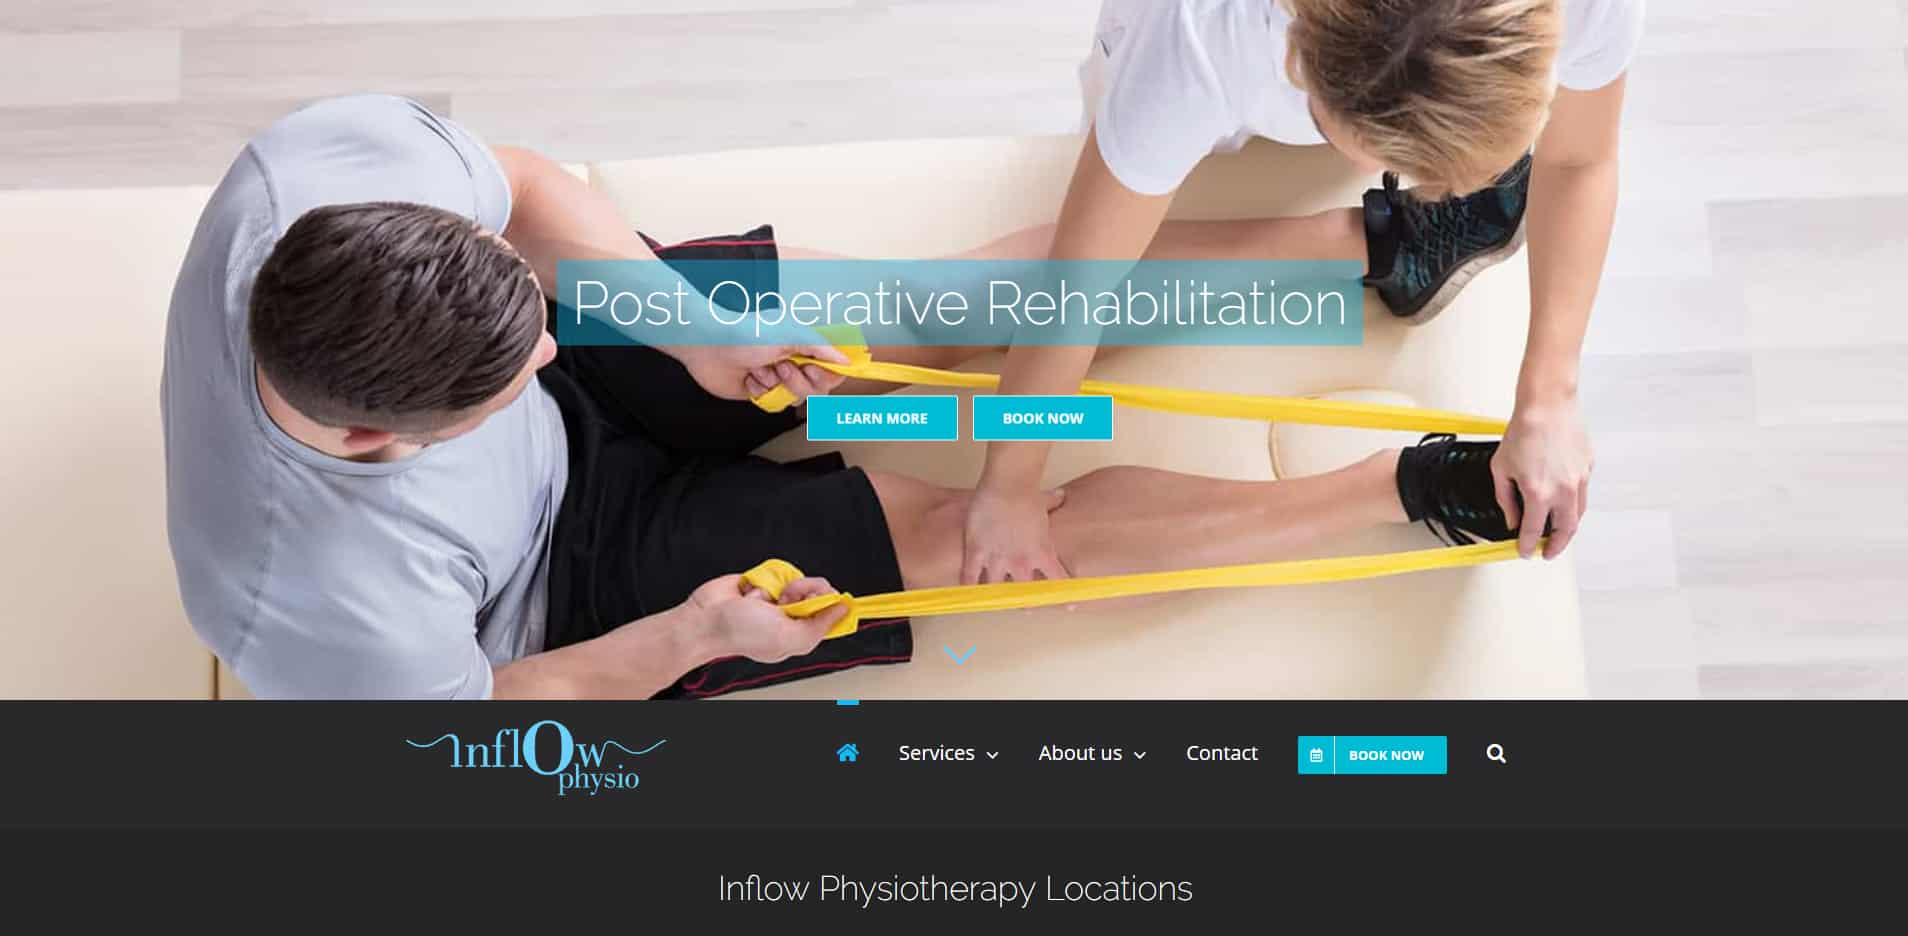 The front page of the website Inflow Physiotherapy that was designed and built by Killer Websites